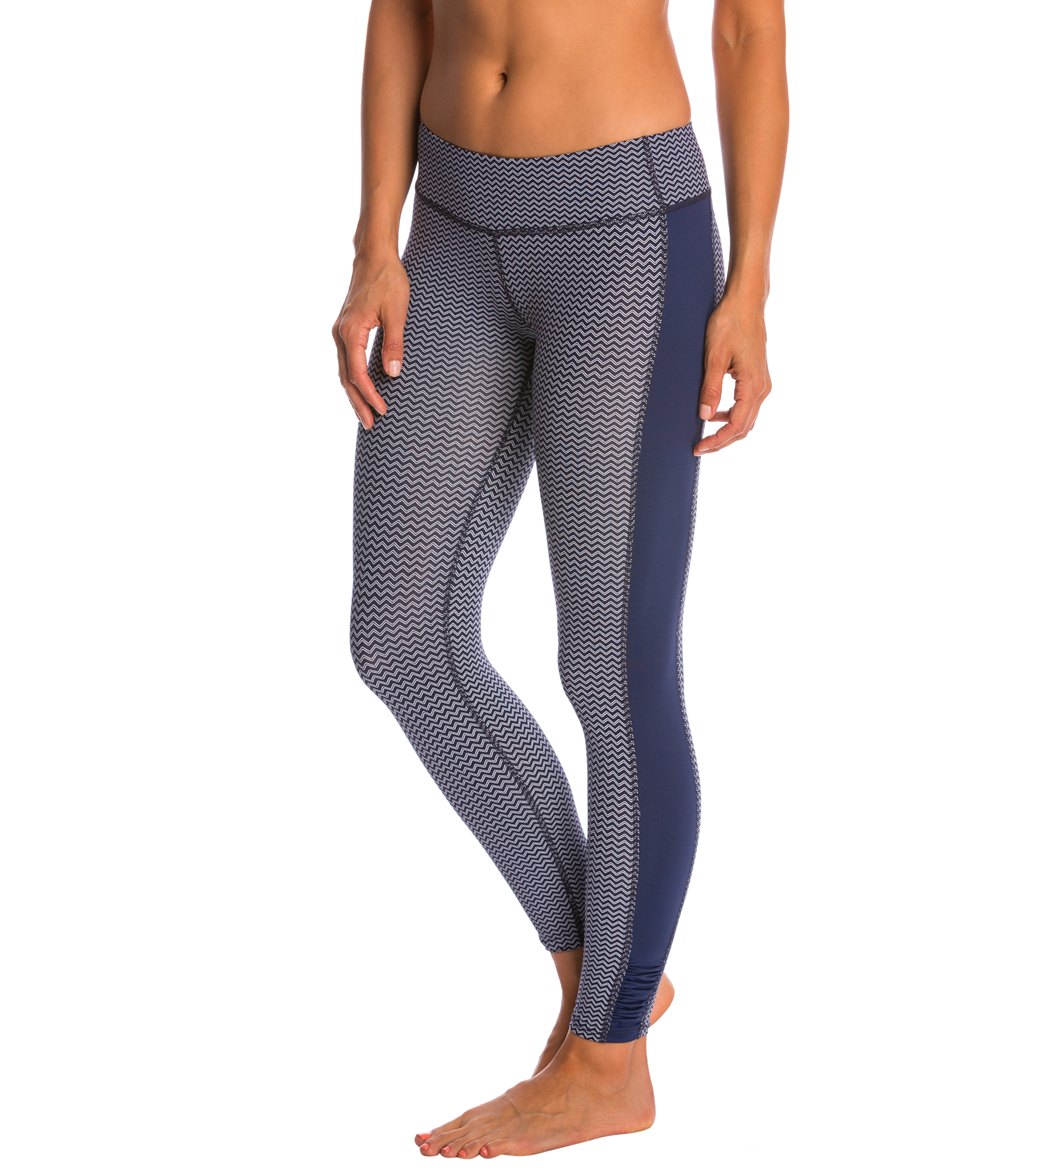 Carve Designs Women's Reef Tight at SwimOutlet.com - Free Shipping